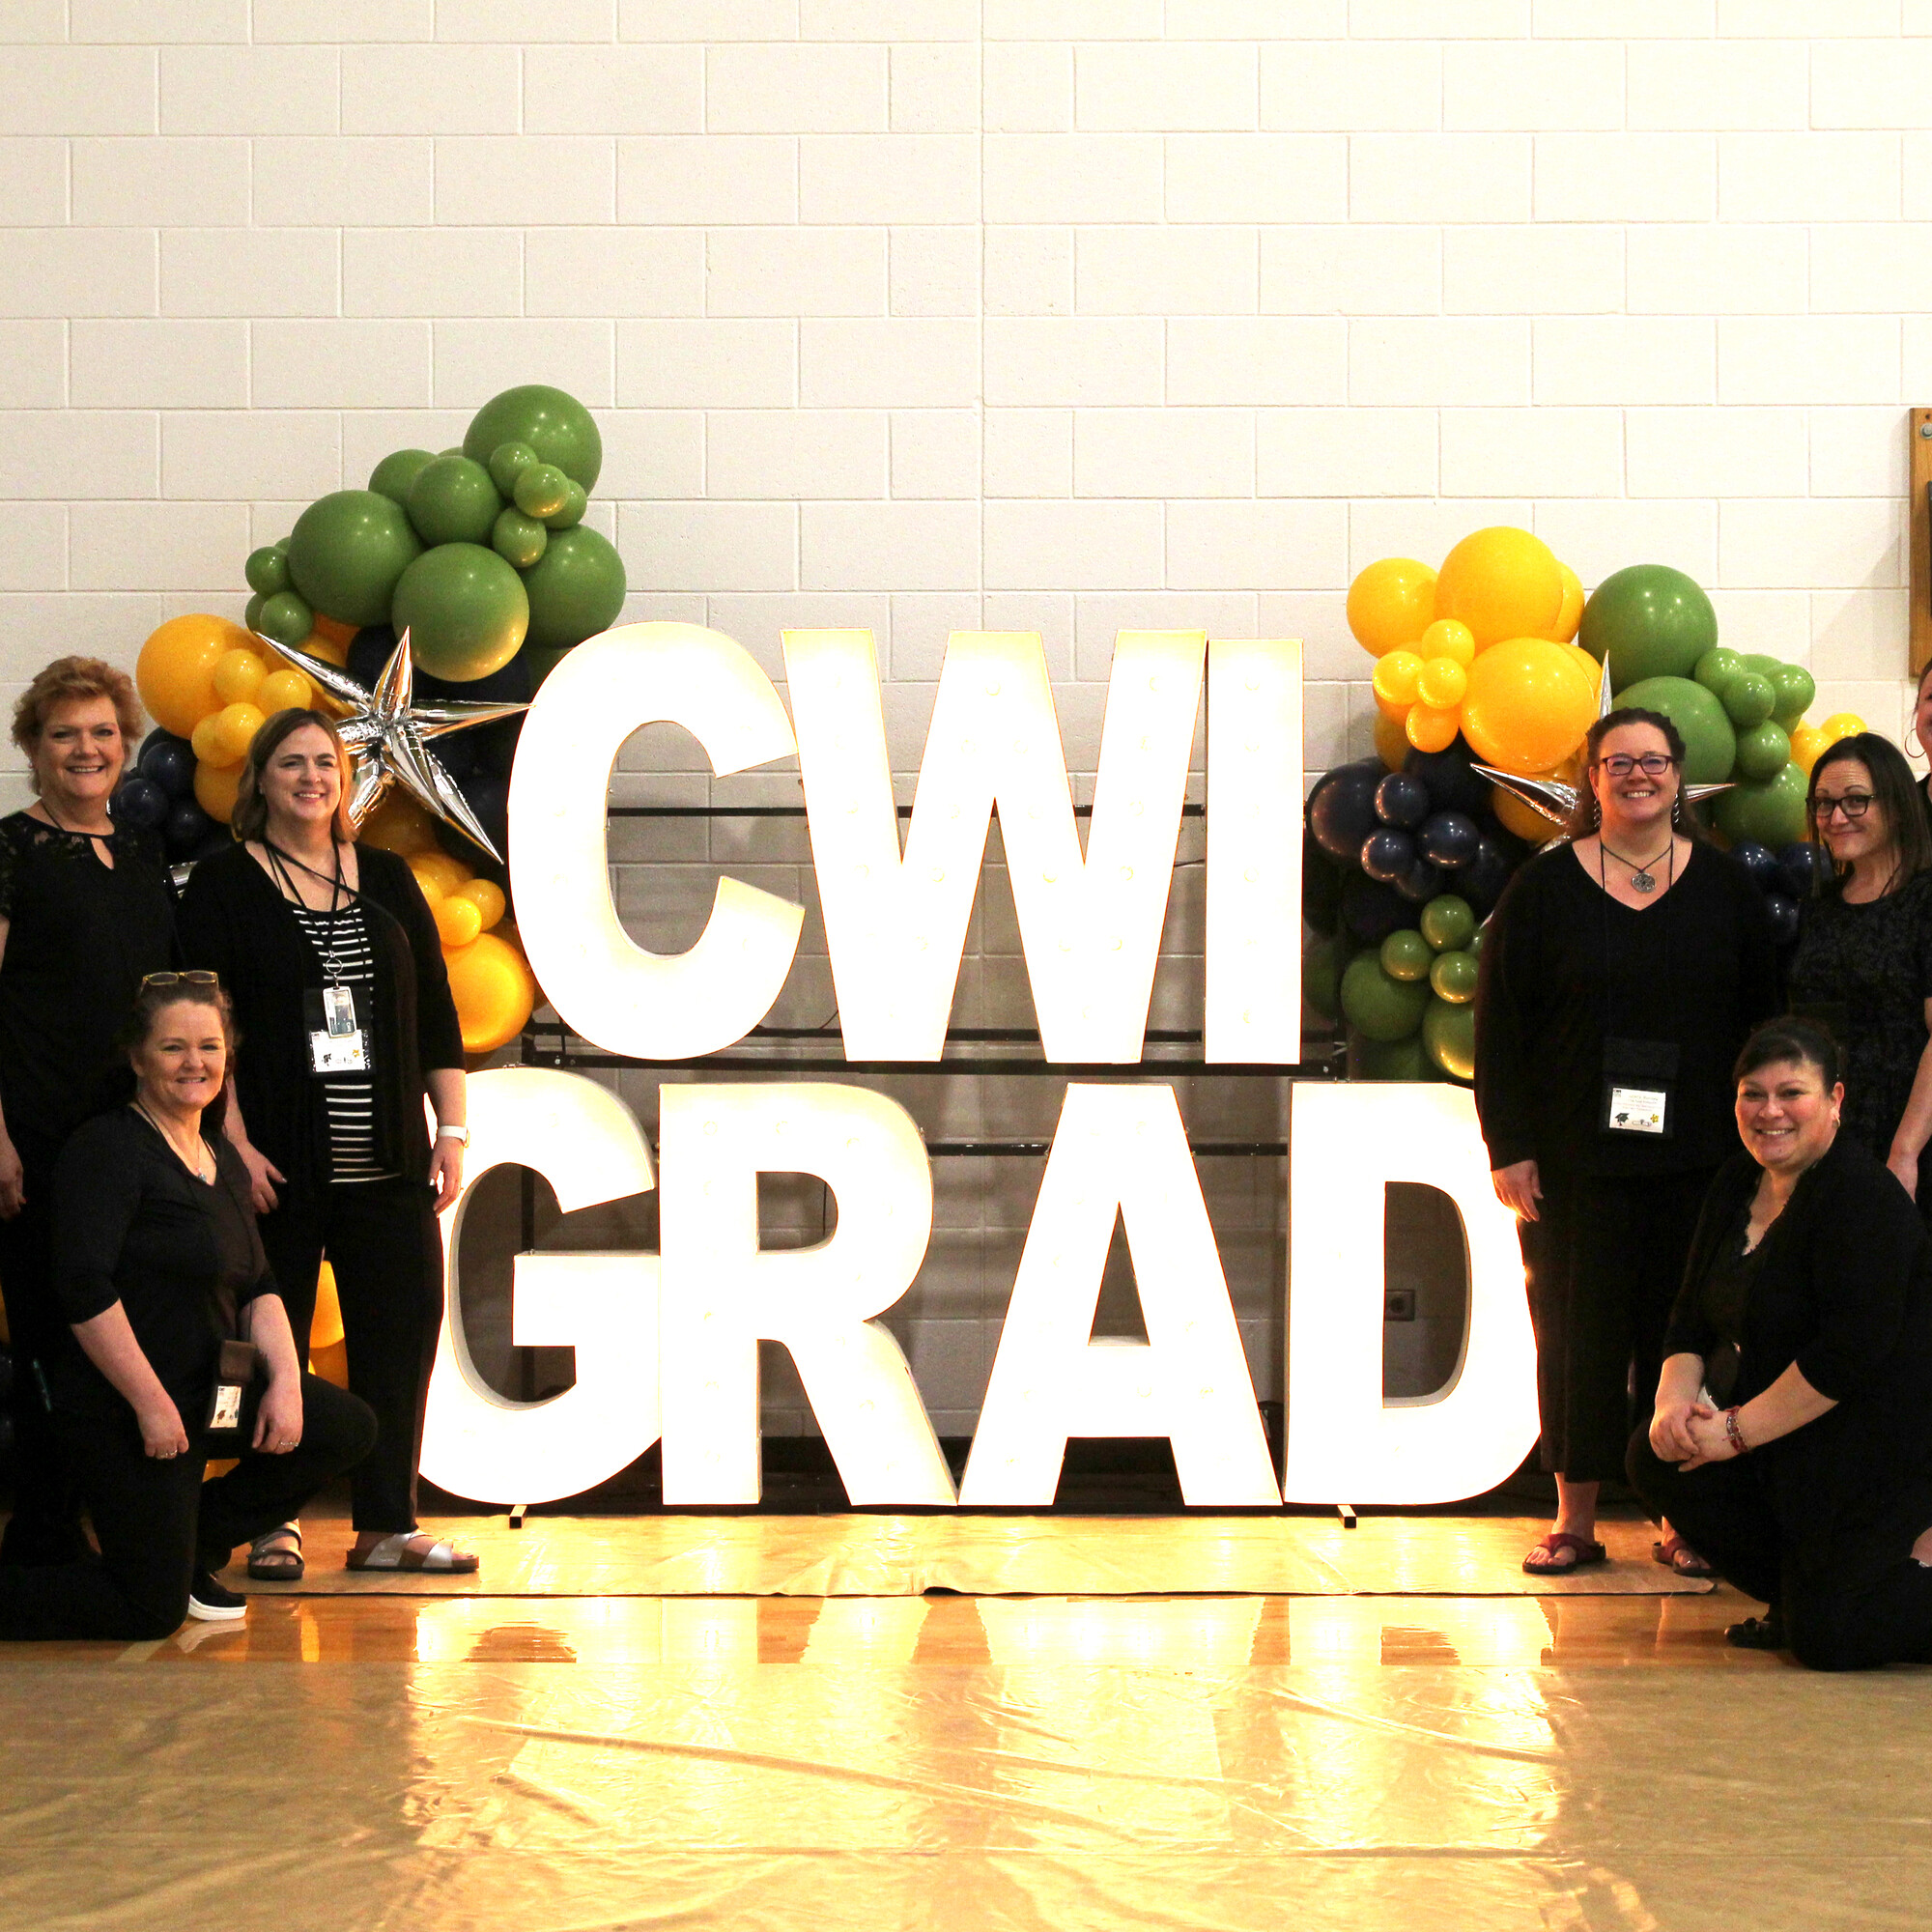 Employees standing in front of CWI Grad sign